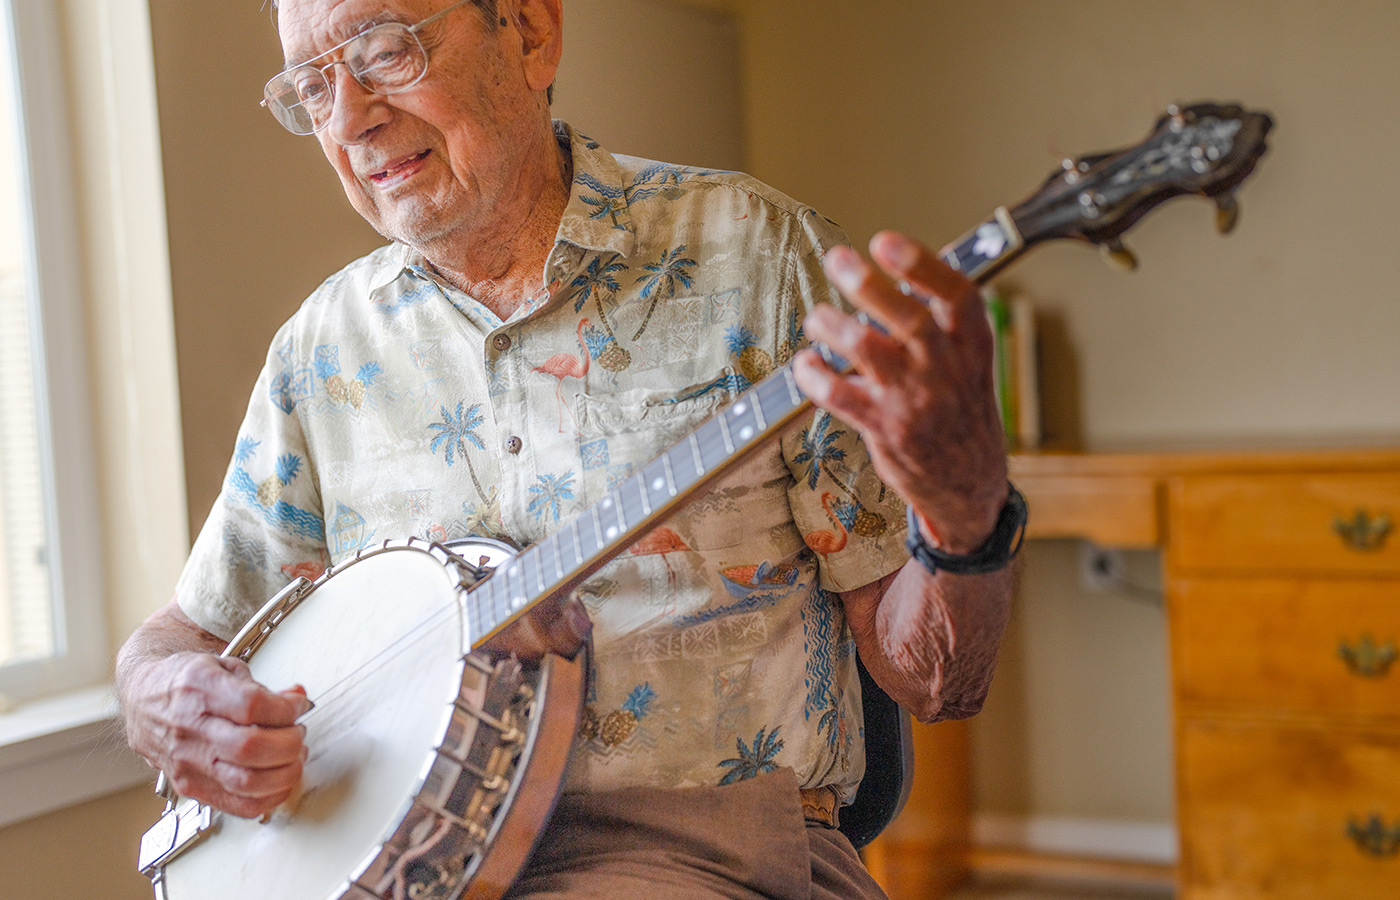 A resident is playing the banjo.